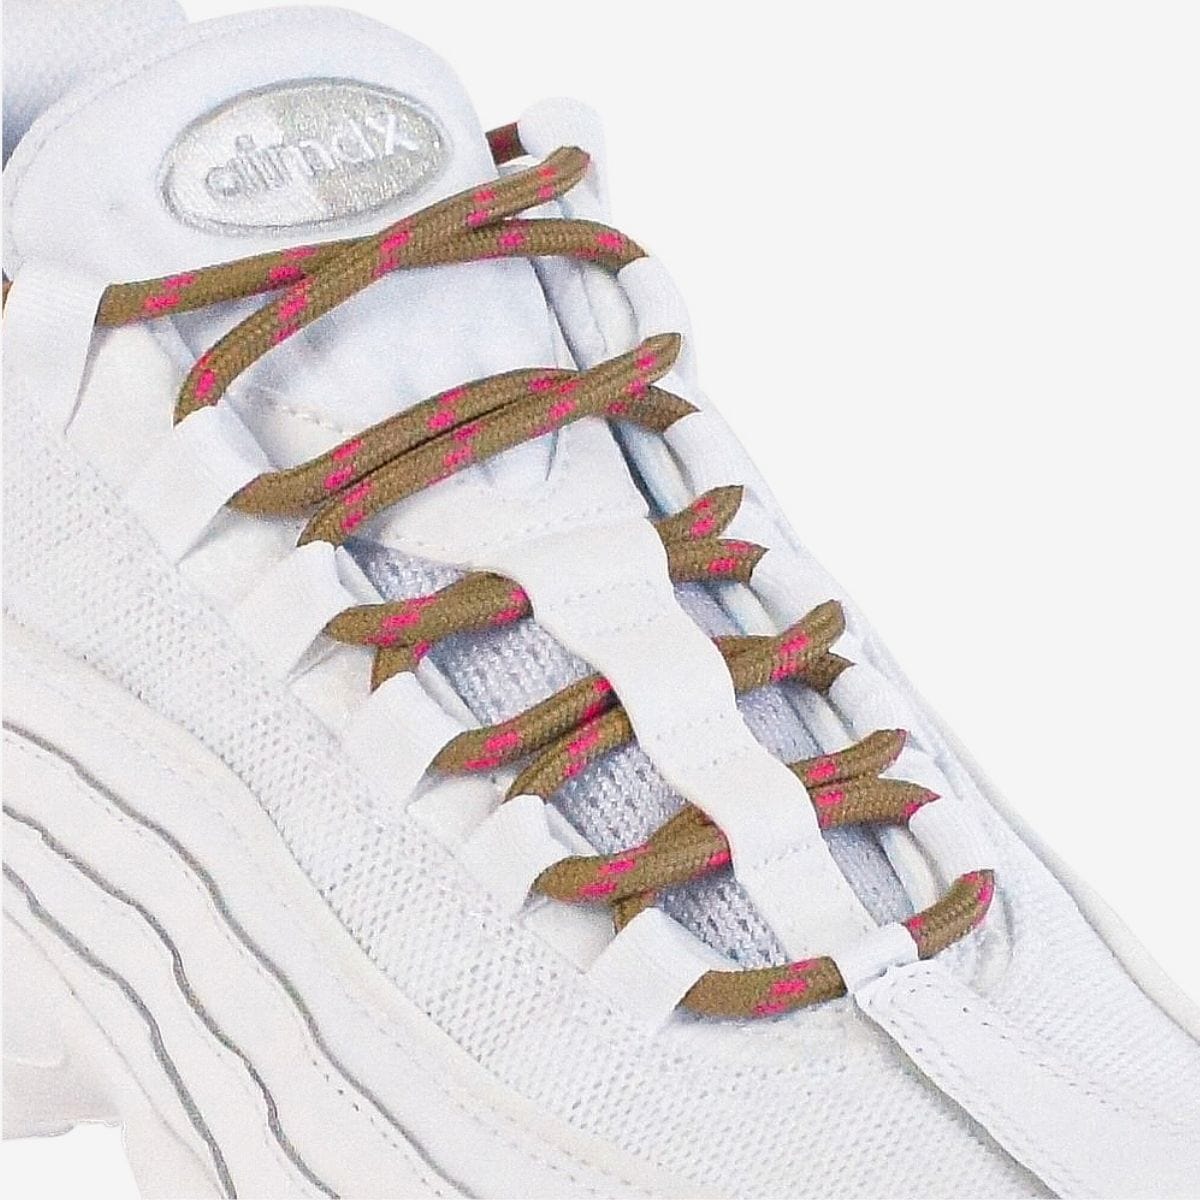 walking-shoe-laces-online-in-australia-colour-brown-and-pink